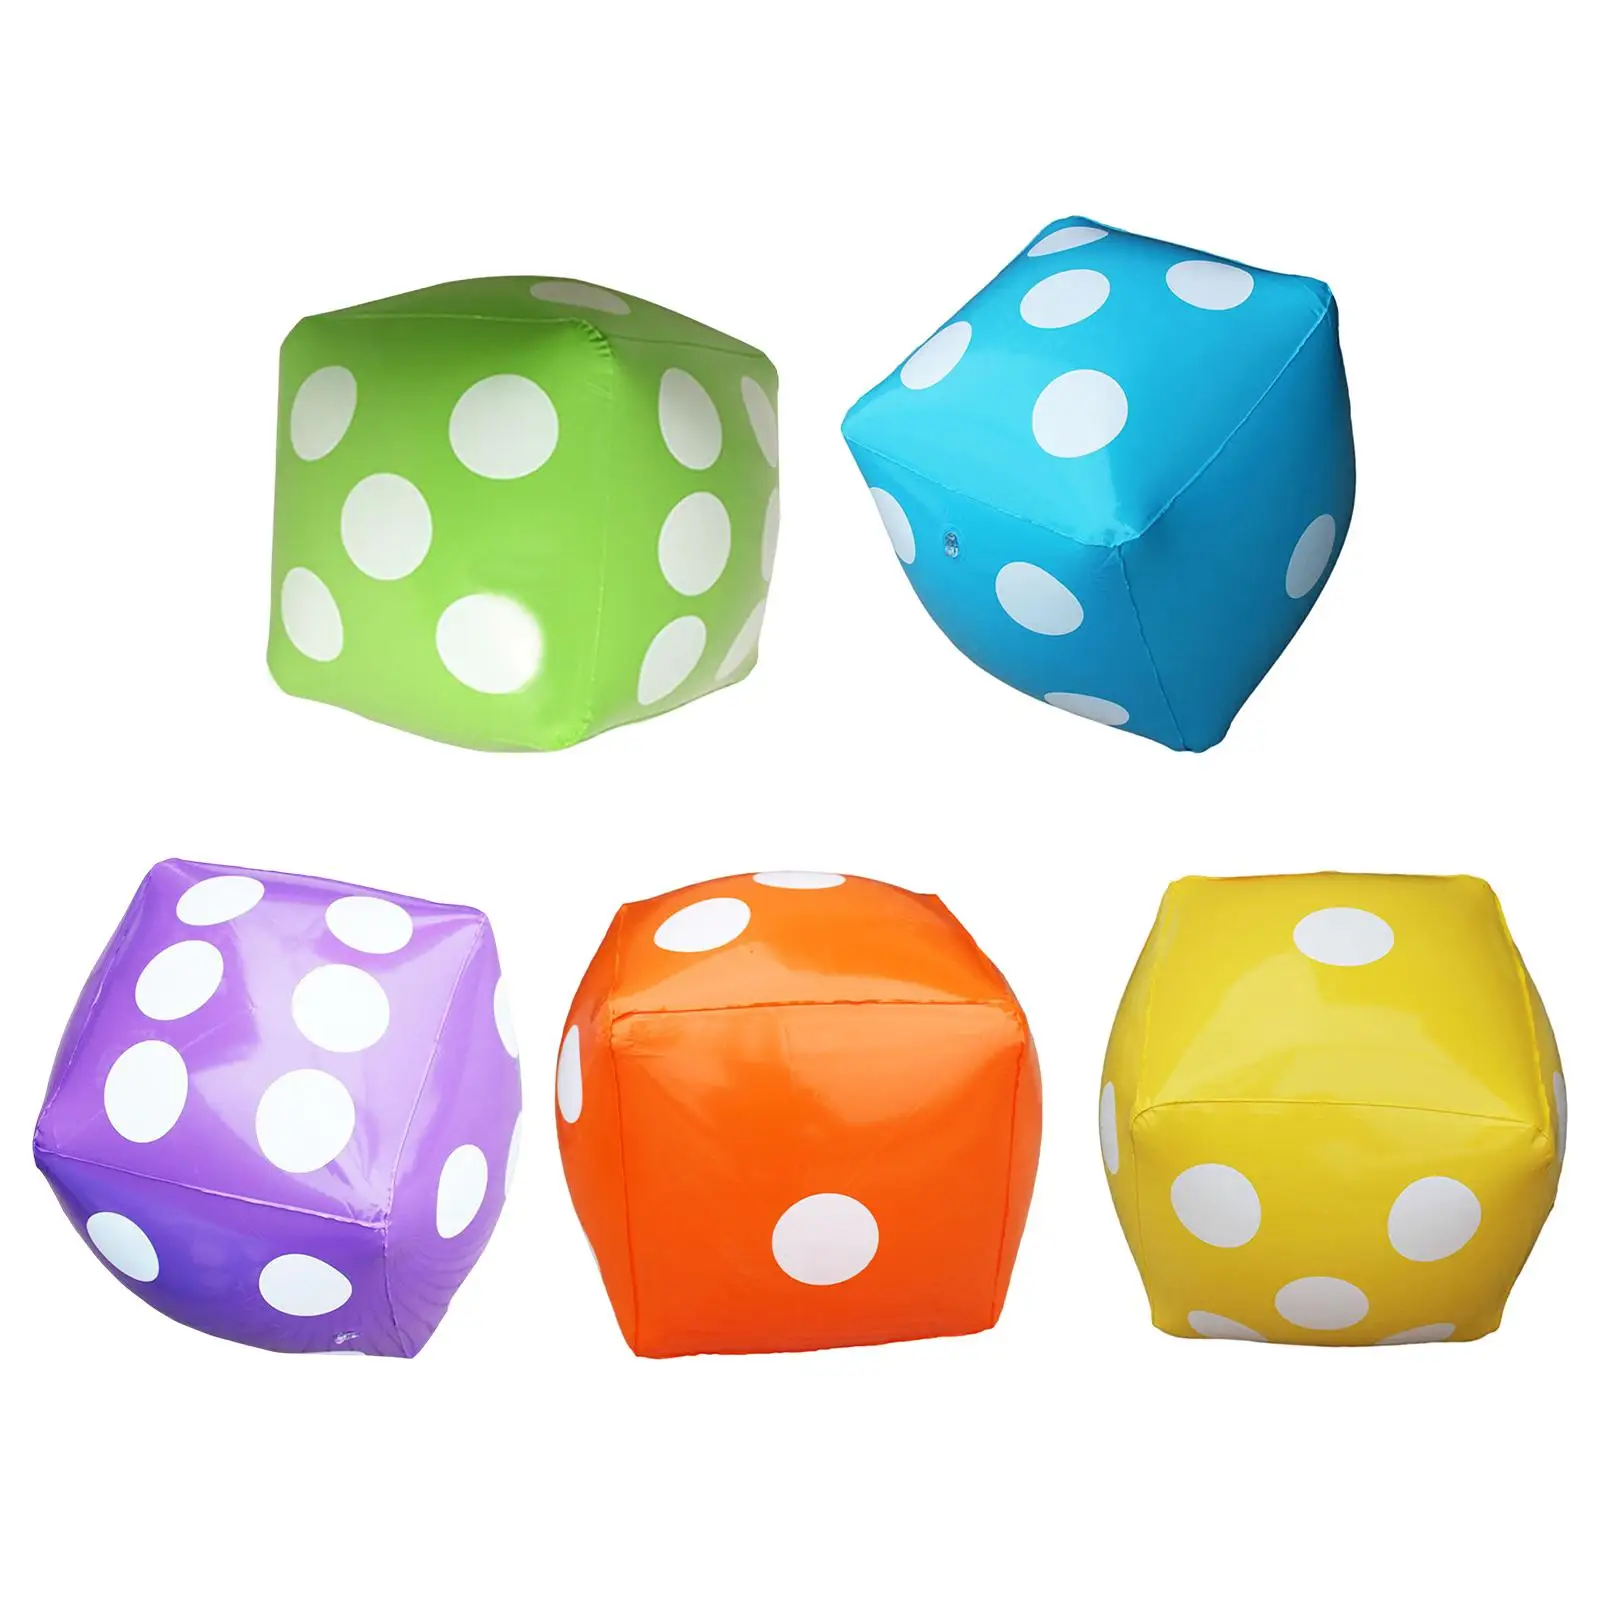 

Giant Inflatable Dice, Swimming Pool Dices, 60cmx60cm, Funny Jumbo Inflatable Dice for Indoor Outdoor Game